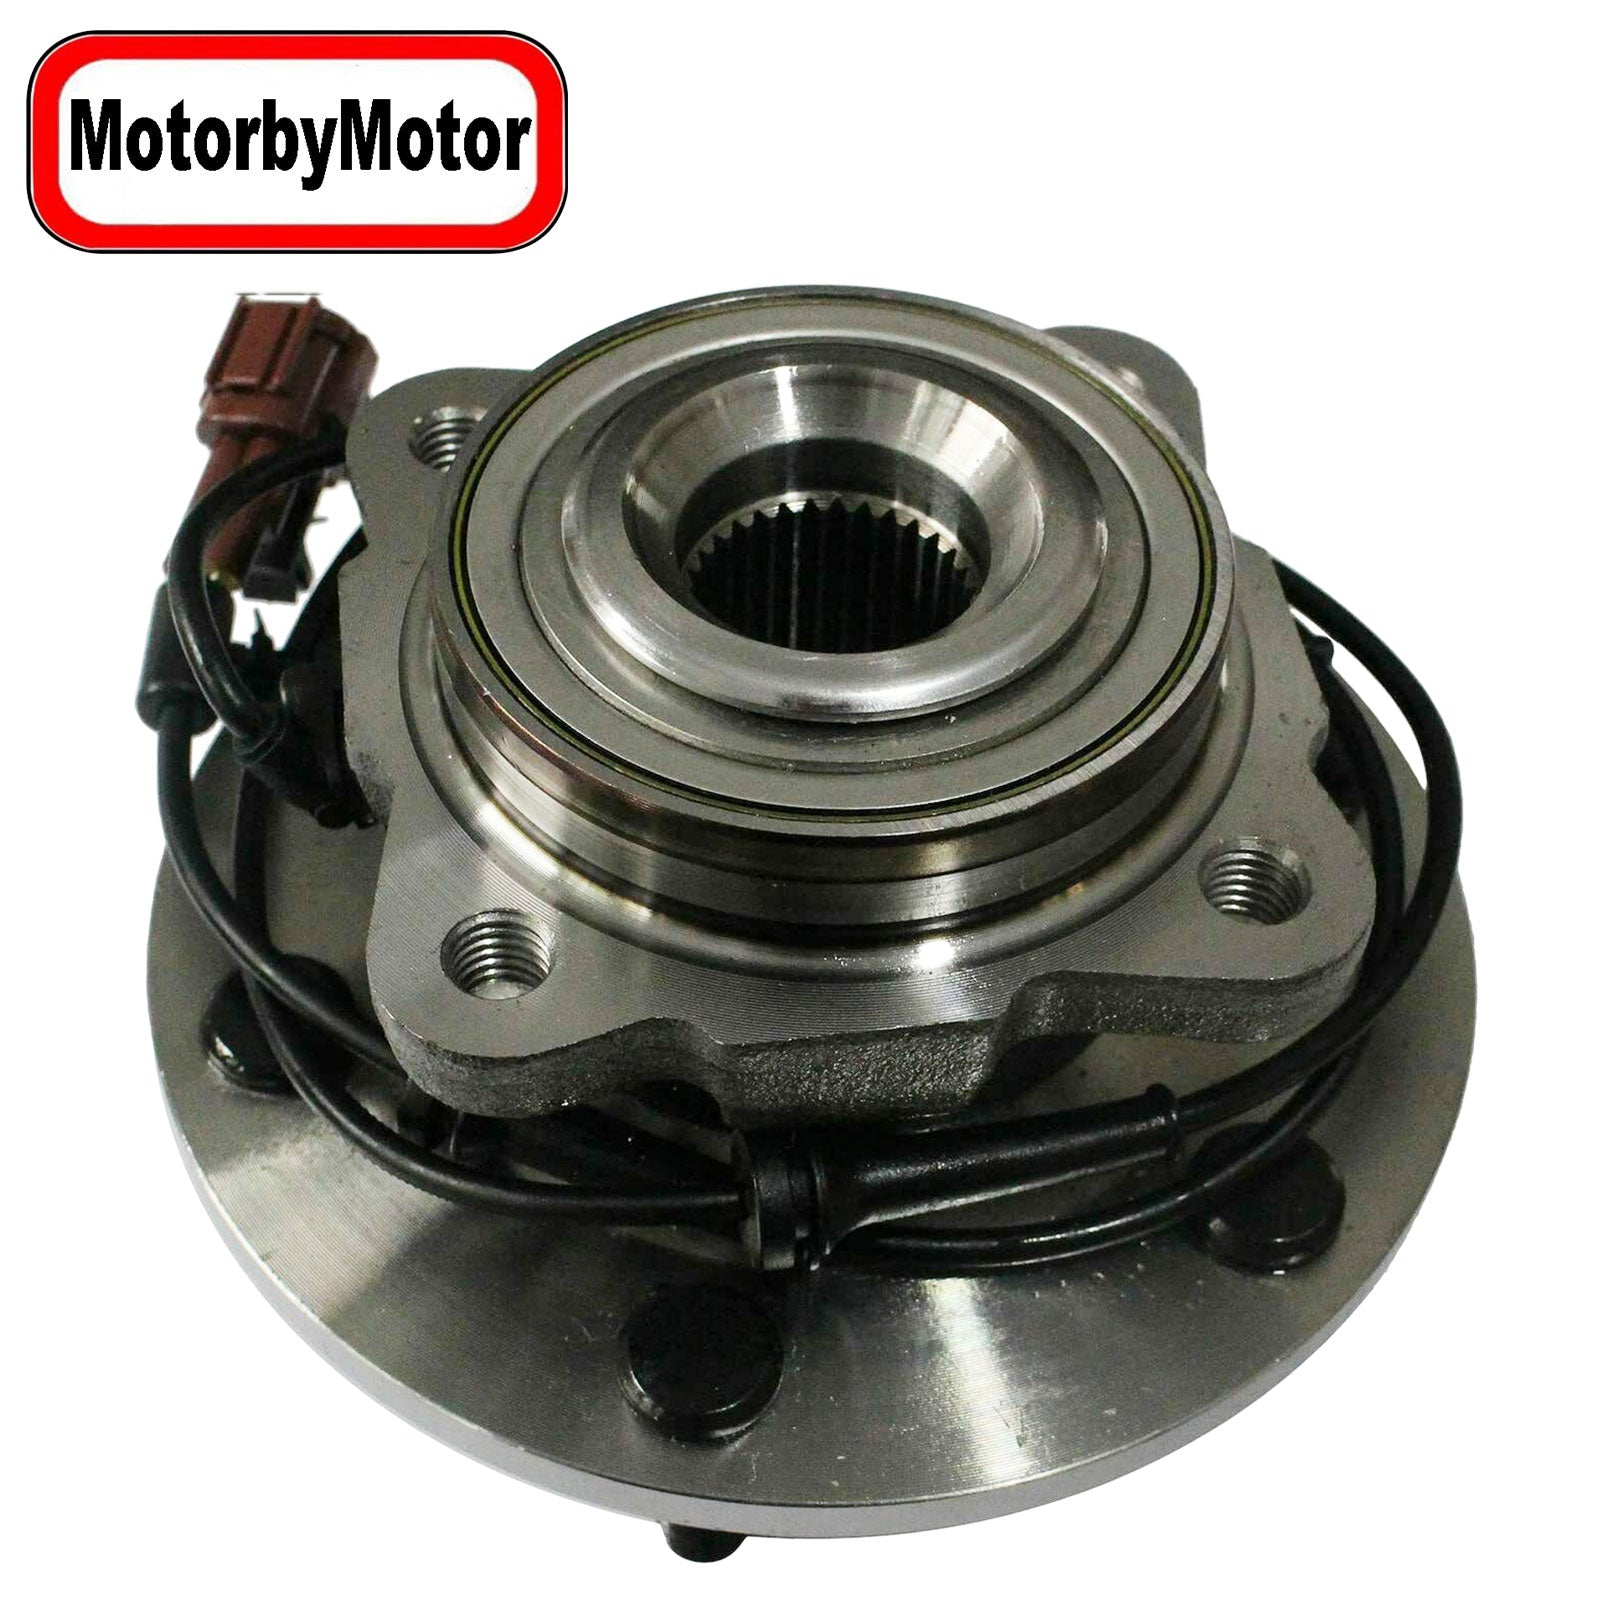 MotorbyMotor 541004 Rear Wheel Bearing and Hub Assembly with 6 Lugs Fits for Infiniti QX56, Nissan Armada Pathfinder Low-Runout OE Directly Replacement Hub Bearing (w/ABS) MotorbyMotor